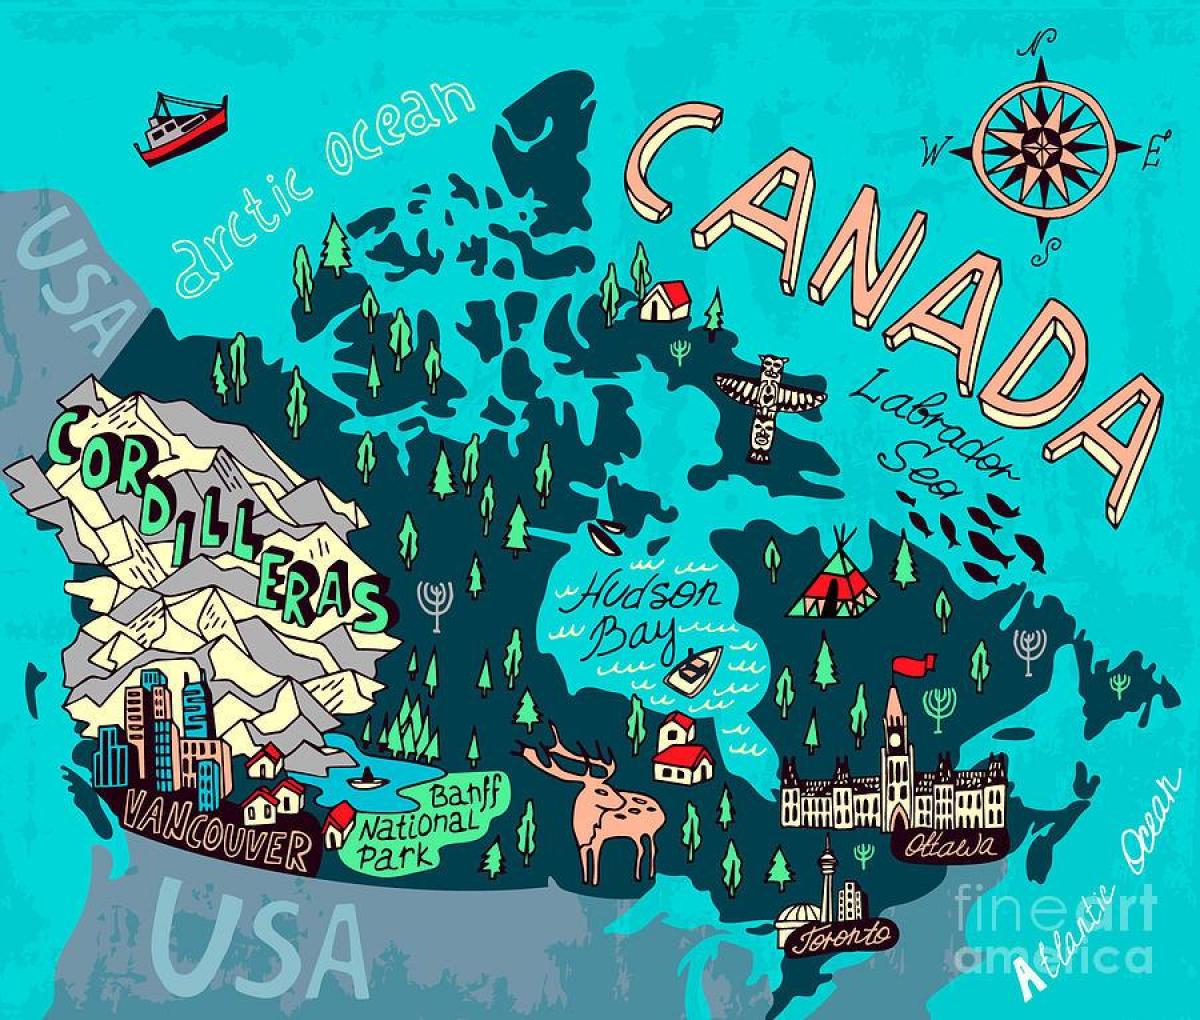 Canada tourist attractions map